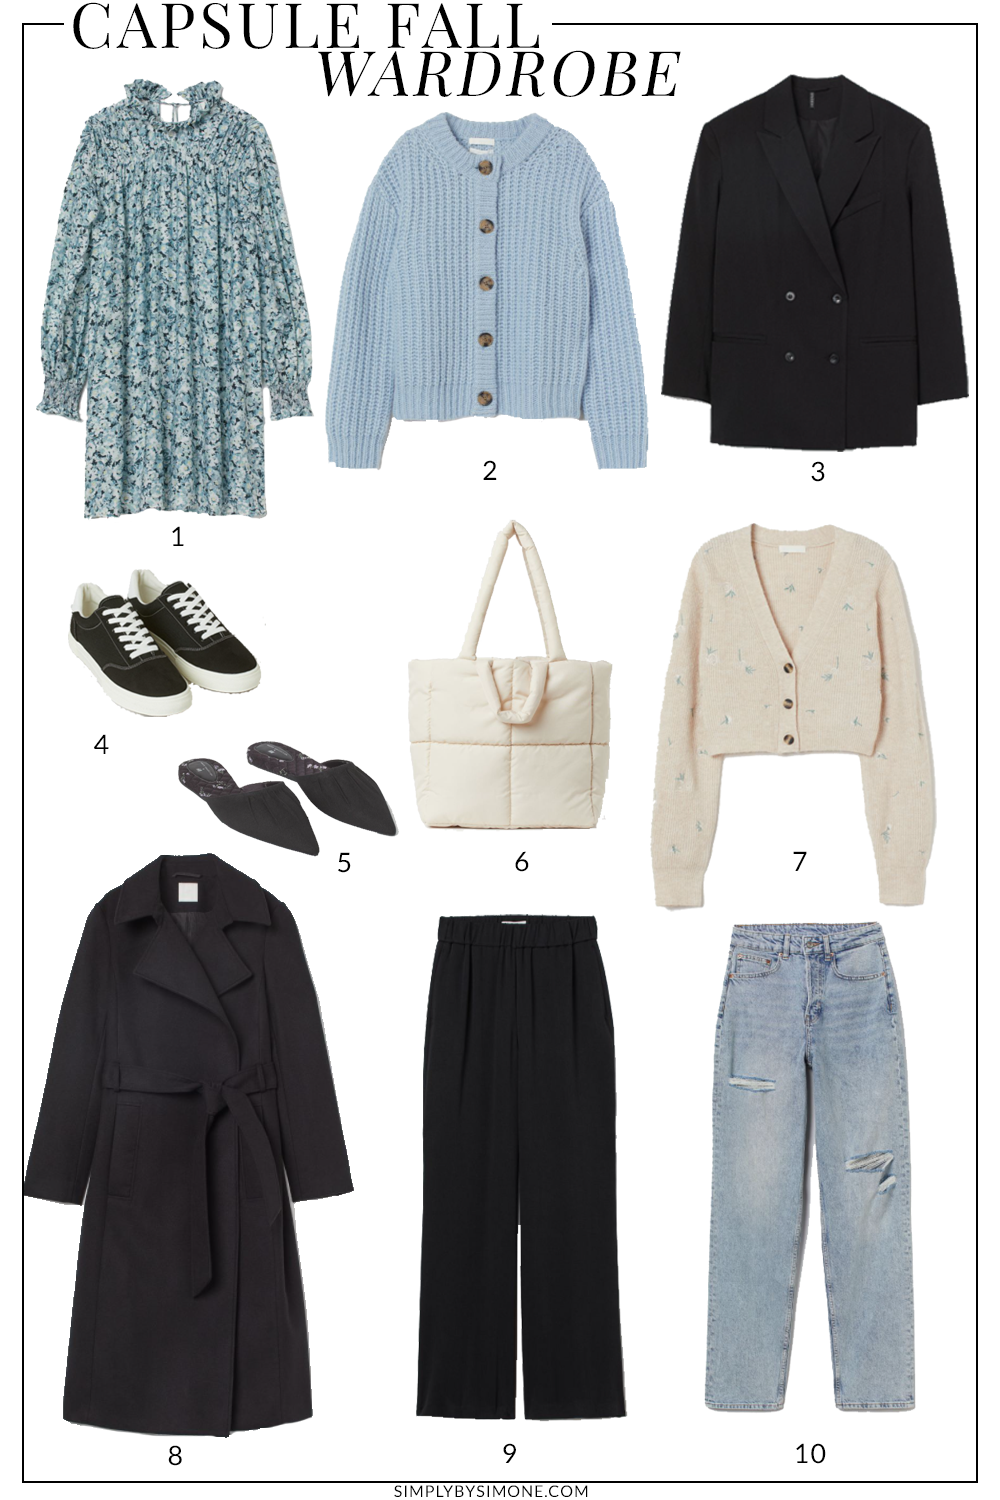 Conscious Affordable HM Fall Capsule Wardrobe Items | 10 Pieces, 36 Outfits | How to Build a Capsule Wardrobe | HM Clothing Fall Clothes | Outfit Inspiration | 36 Fall Weather Outfit Ideas | Fall Vacation Packing Guide | HM Clothing Fall Capsule Wardrobe| What To Wear this Fall 2021 | Simply by Simone | Conscious Affordable HM Fall Capsule Wardrobe | What To Wear This Fall 2021